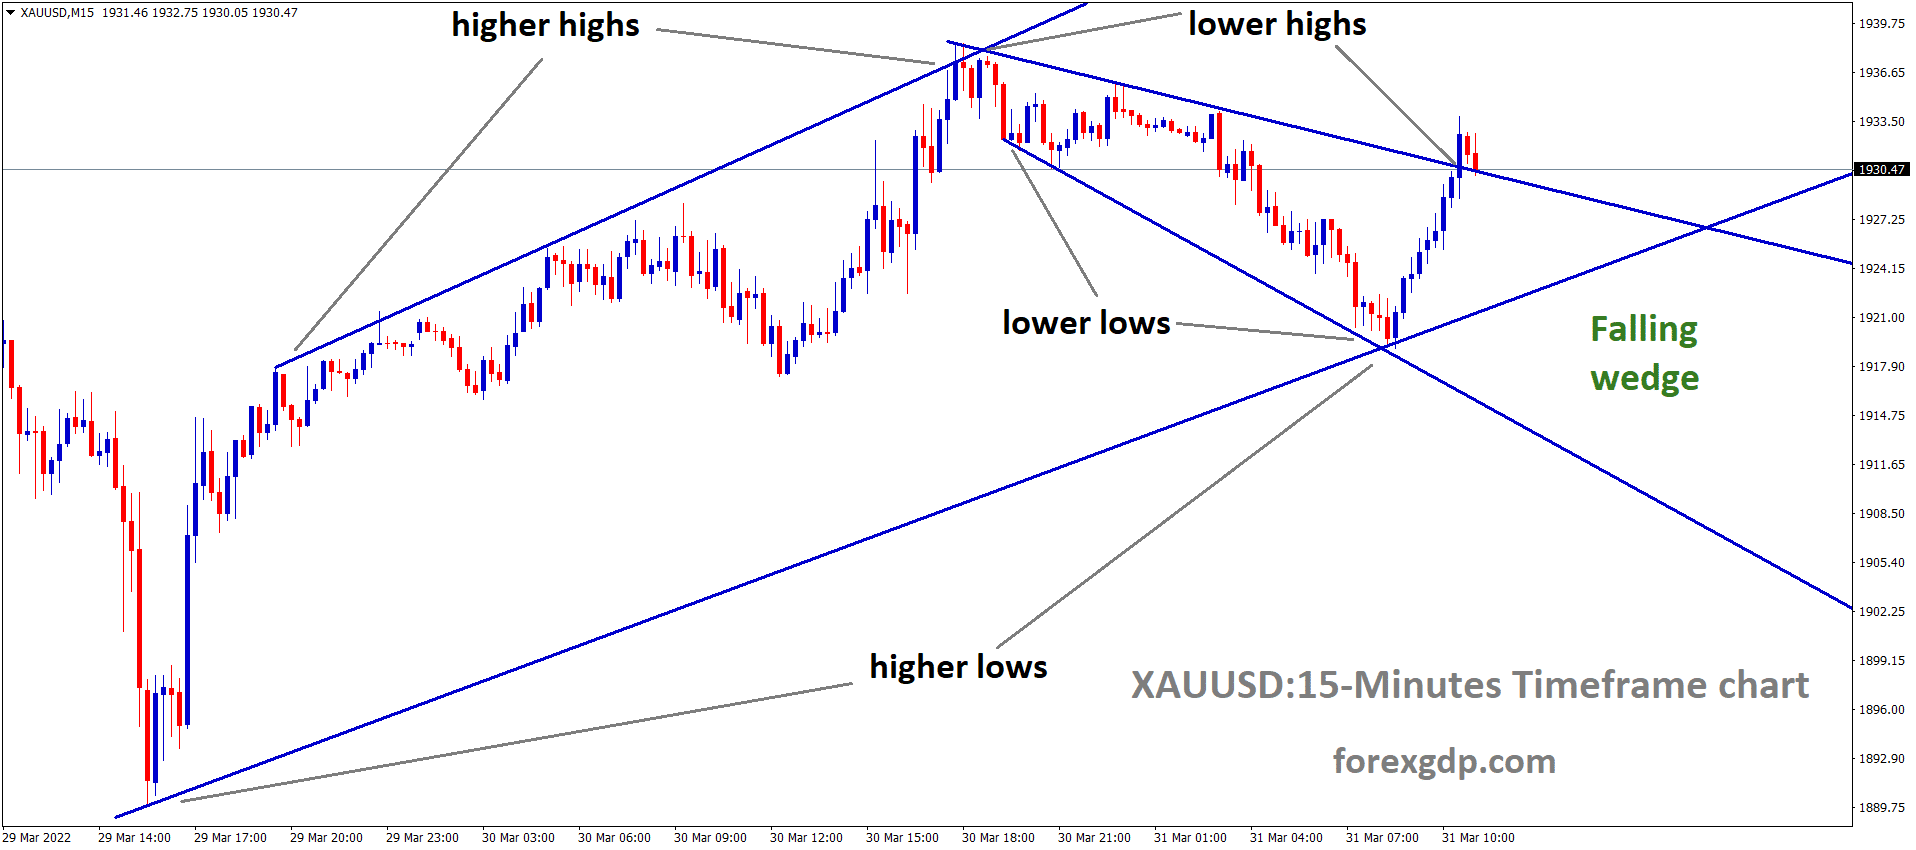 XAUUSD M15 time Market has rebounded from the Major Descending channel and The market has reached the lor high area of the Falling Wedge Pattern